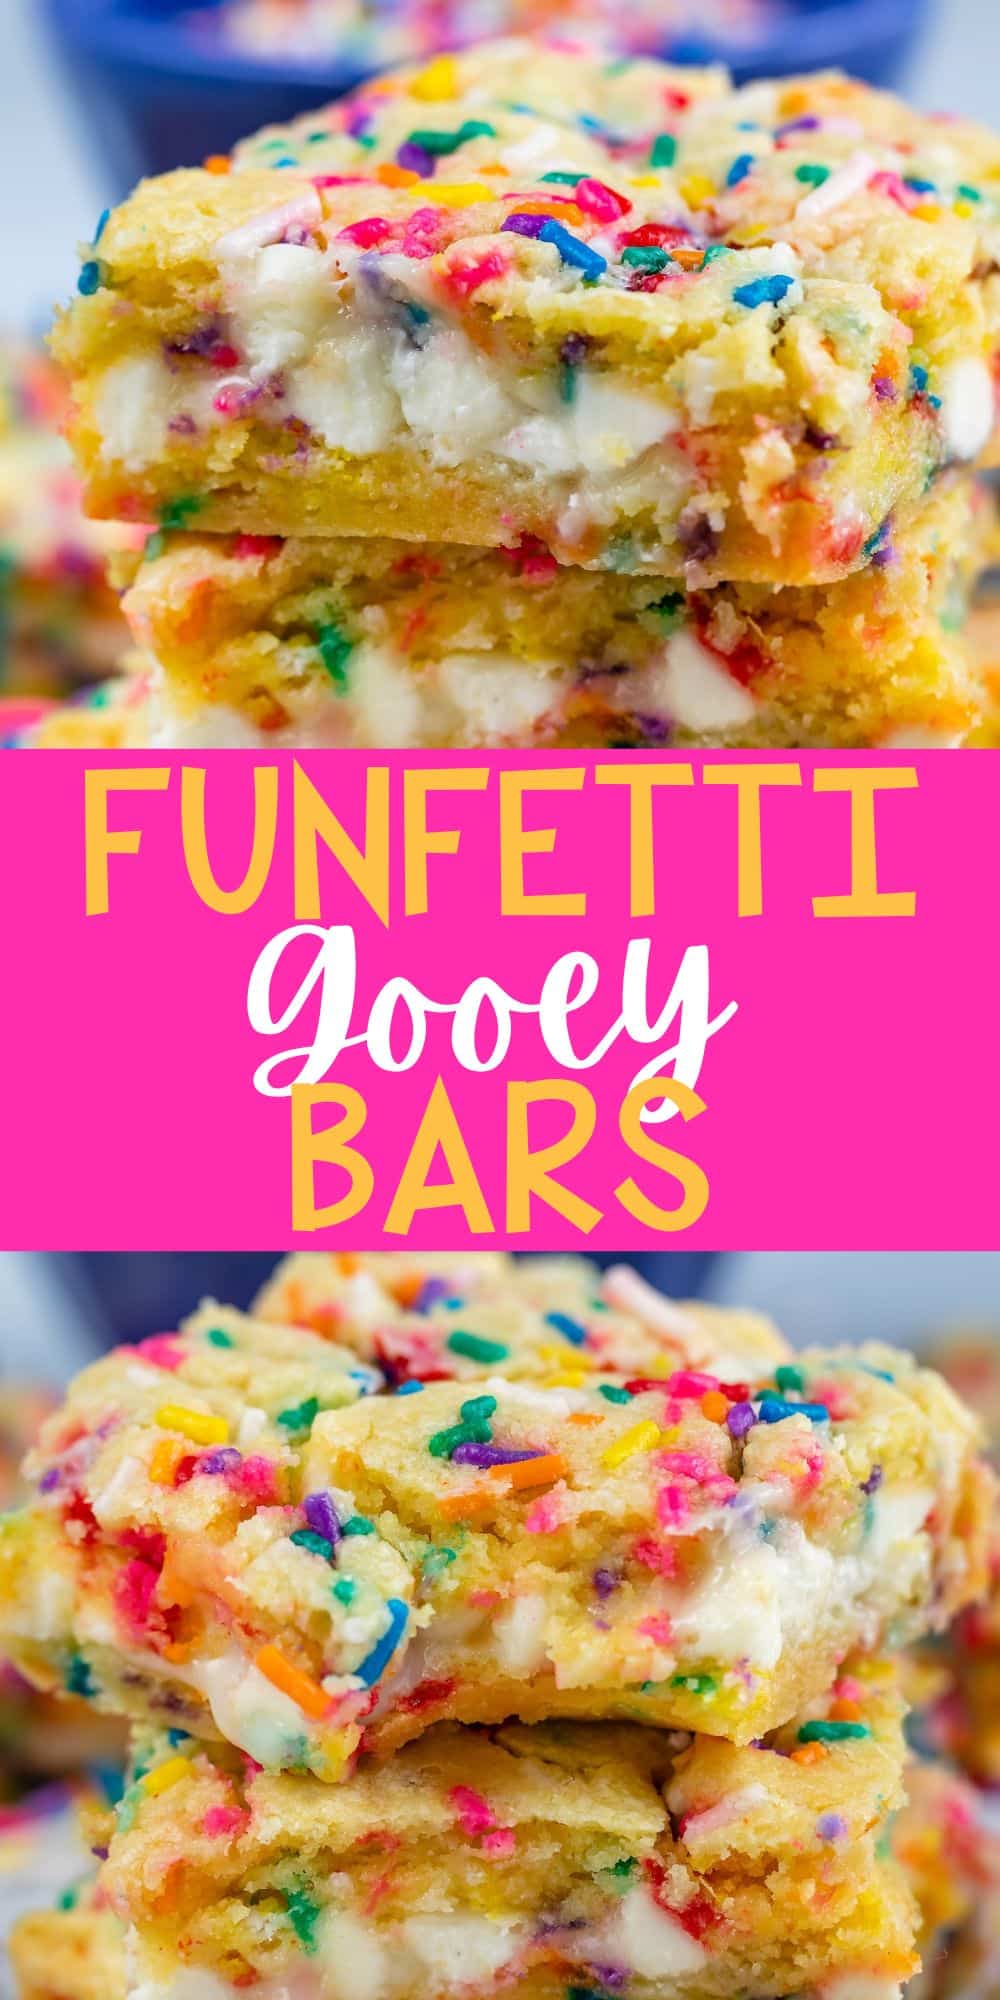 two photos of stacked funfetti bars with white chocolate chips and colorful sprinkles baked in with words on the image.